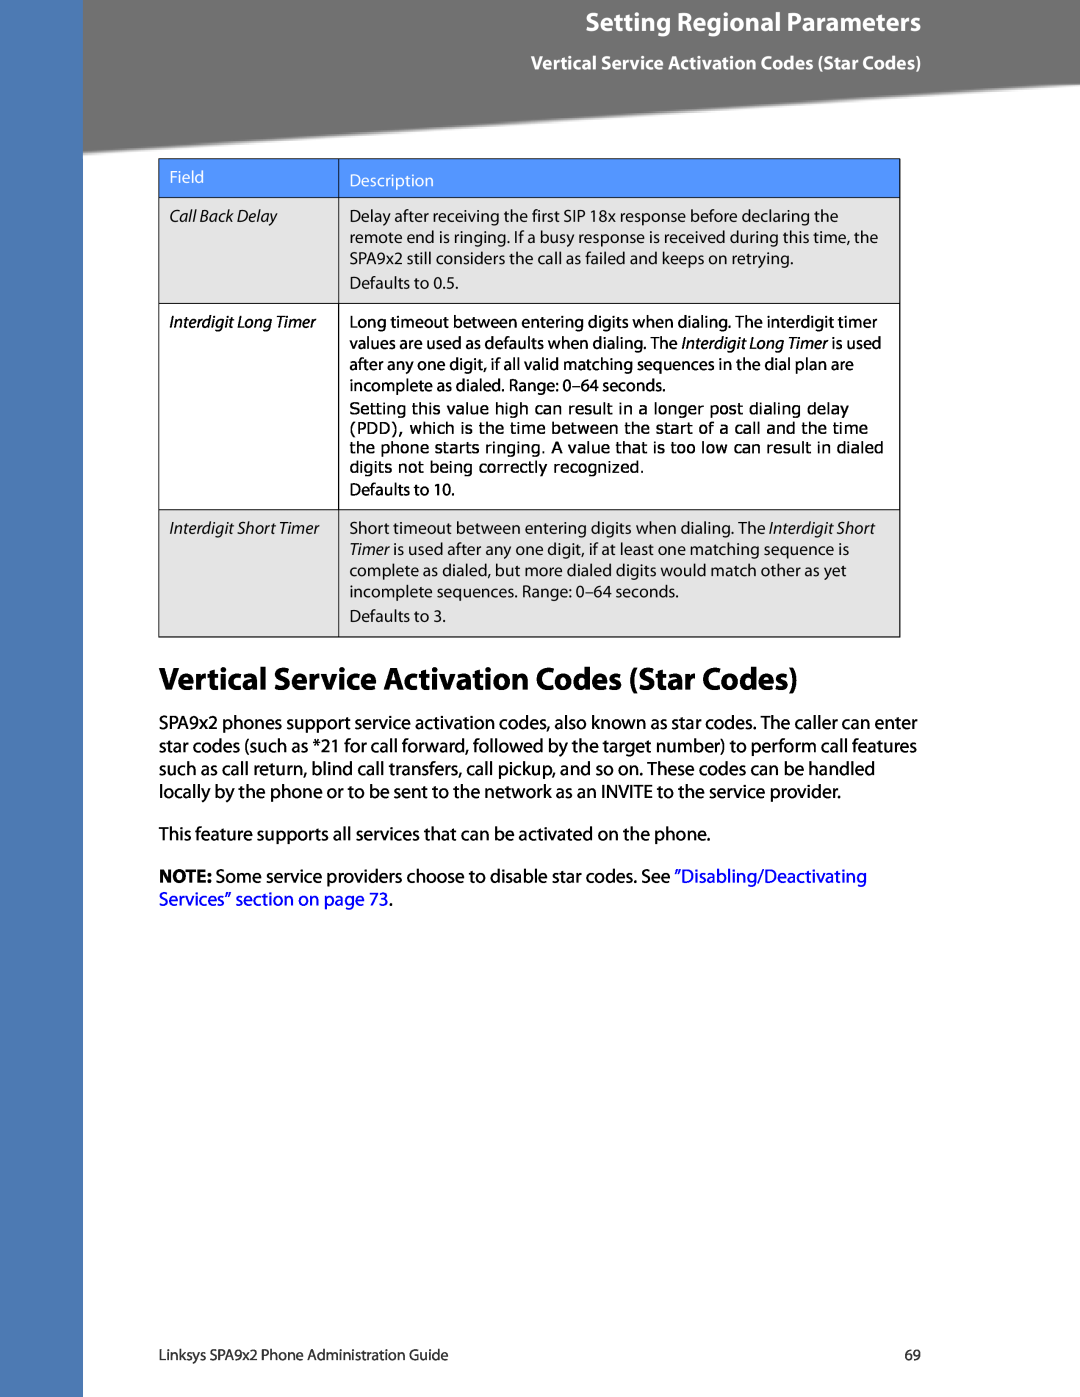 Linksys SPA962, SPA942 manual Vertical Service Activation Codes Star Codes, Setting Regional Parameters, Field, Description 